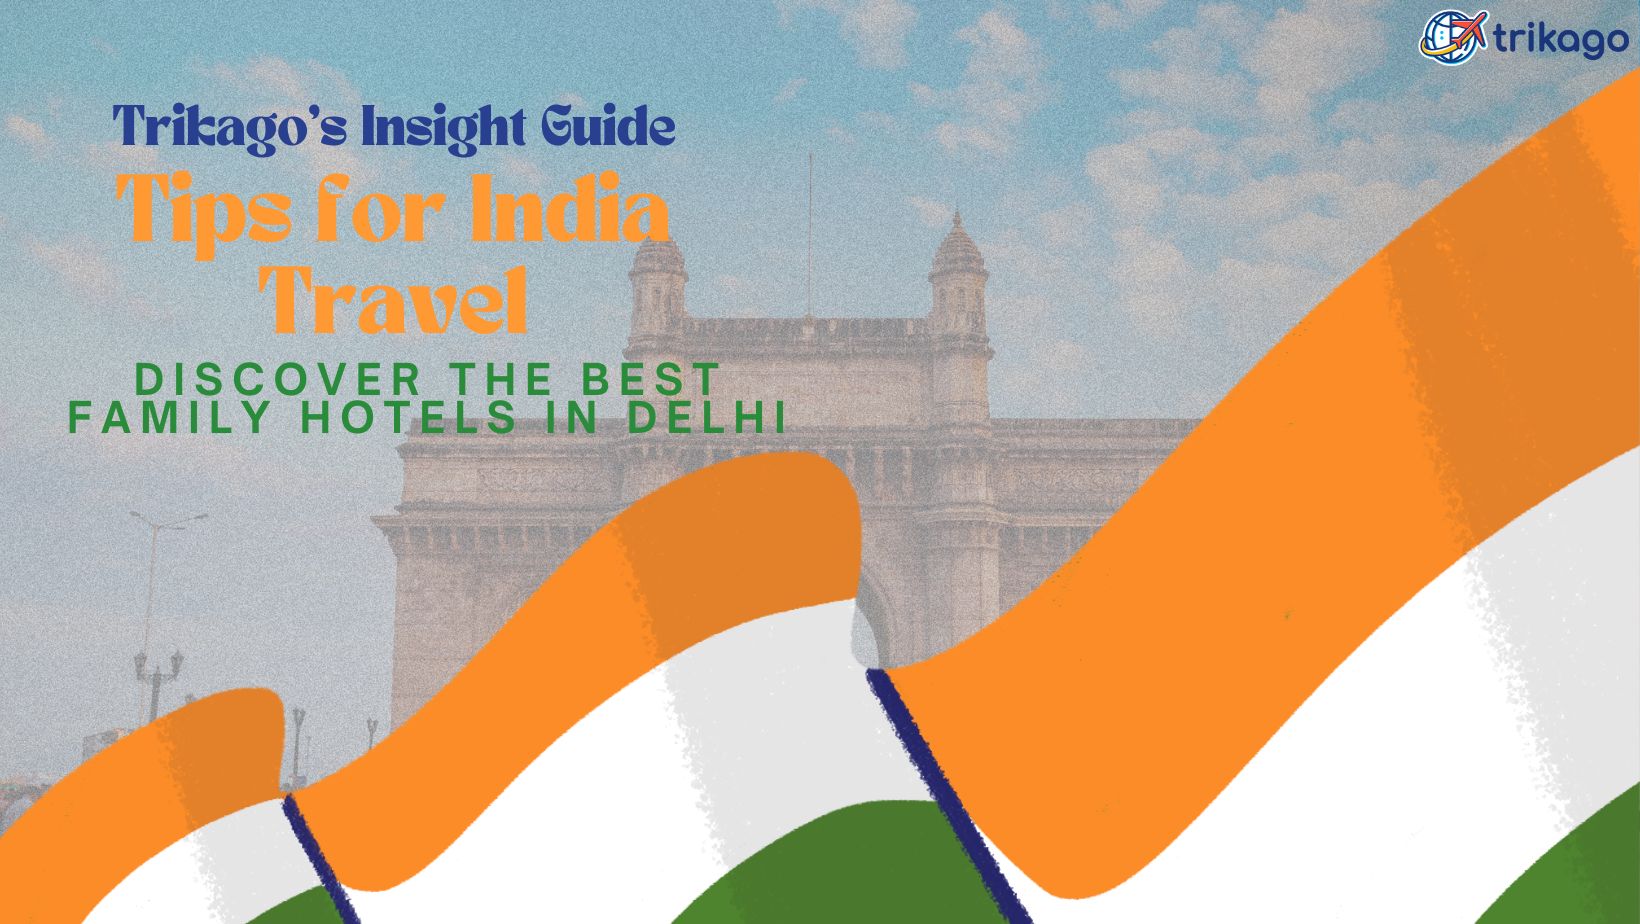 Trikago's Insight Guide: Discover the Best Family Hotels in Delhi & Tips for India Travel